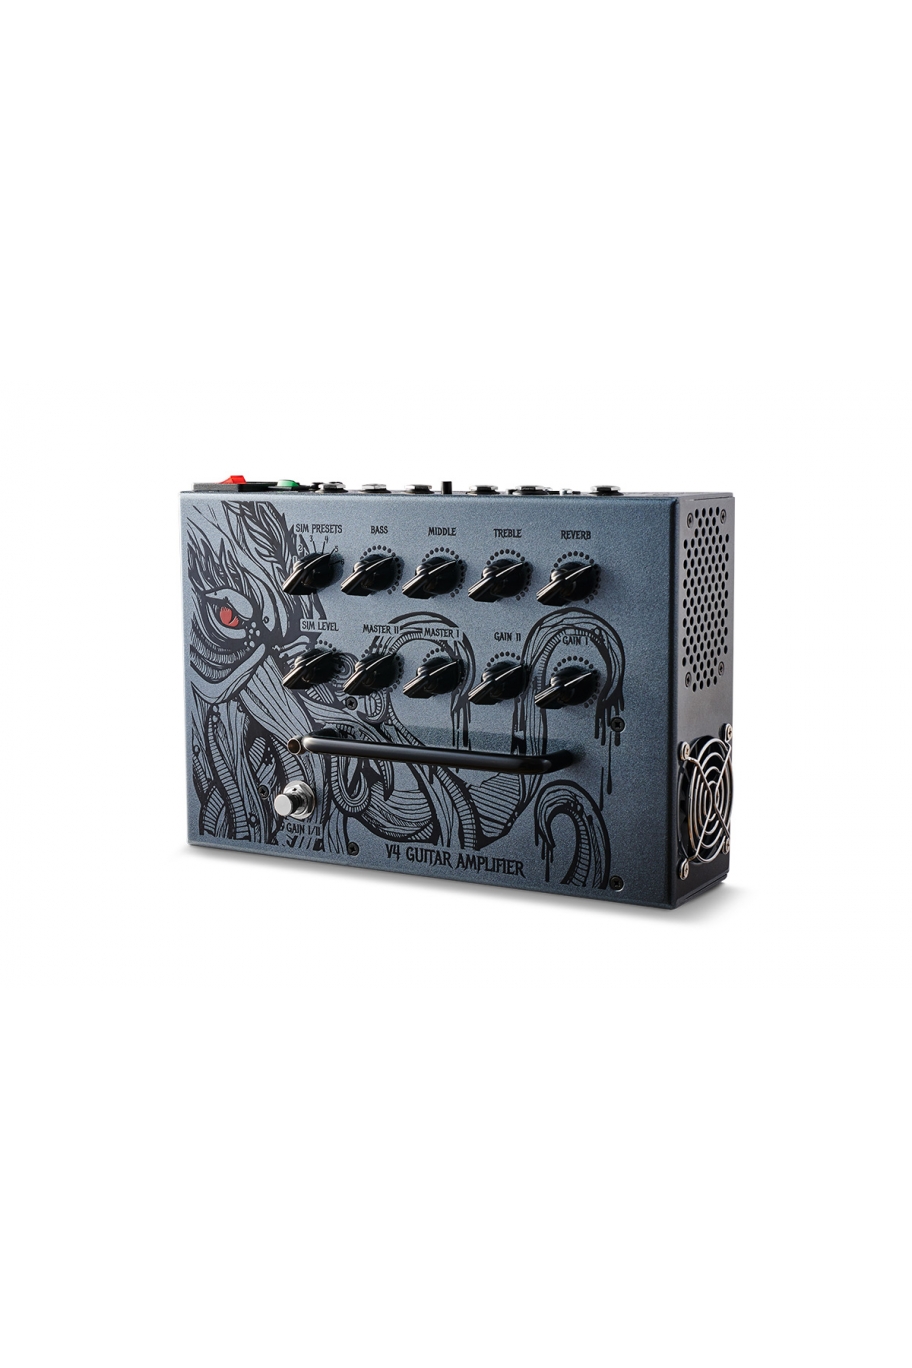 VICTORY V4 The Kraken - Valve Power Amp with Two Notes